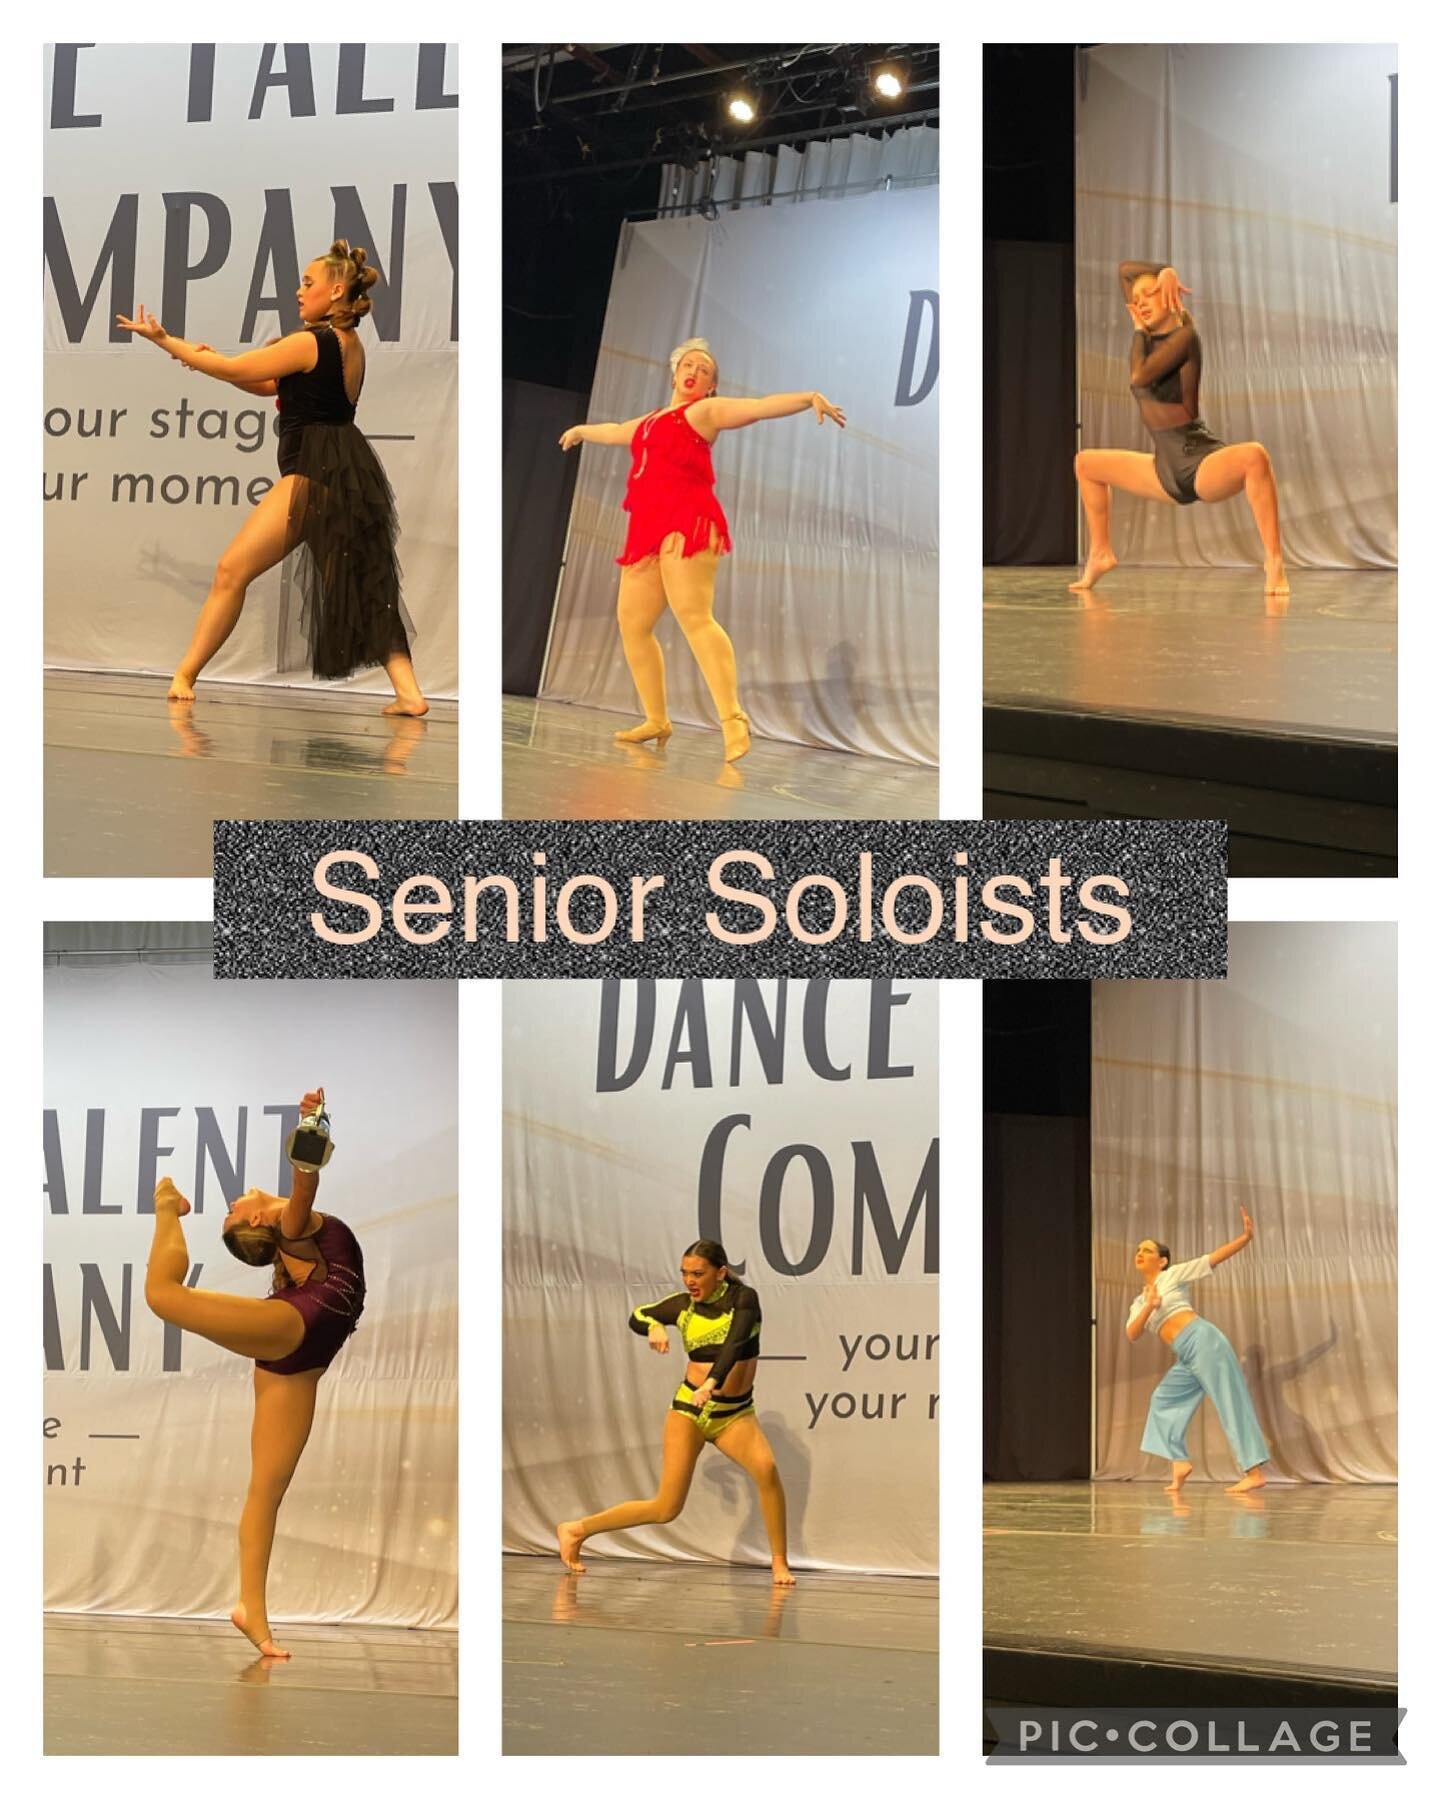 These senior soloists are on fire today! Let&rsquo;s GOOOO dancers! 🫵🏻
#dancetalent #dtcbillings